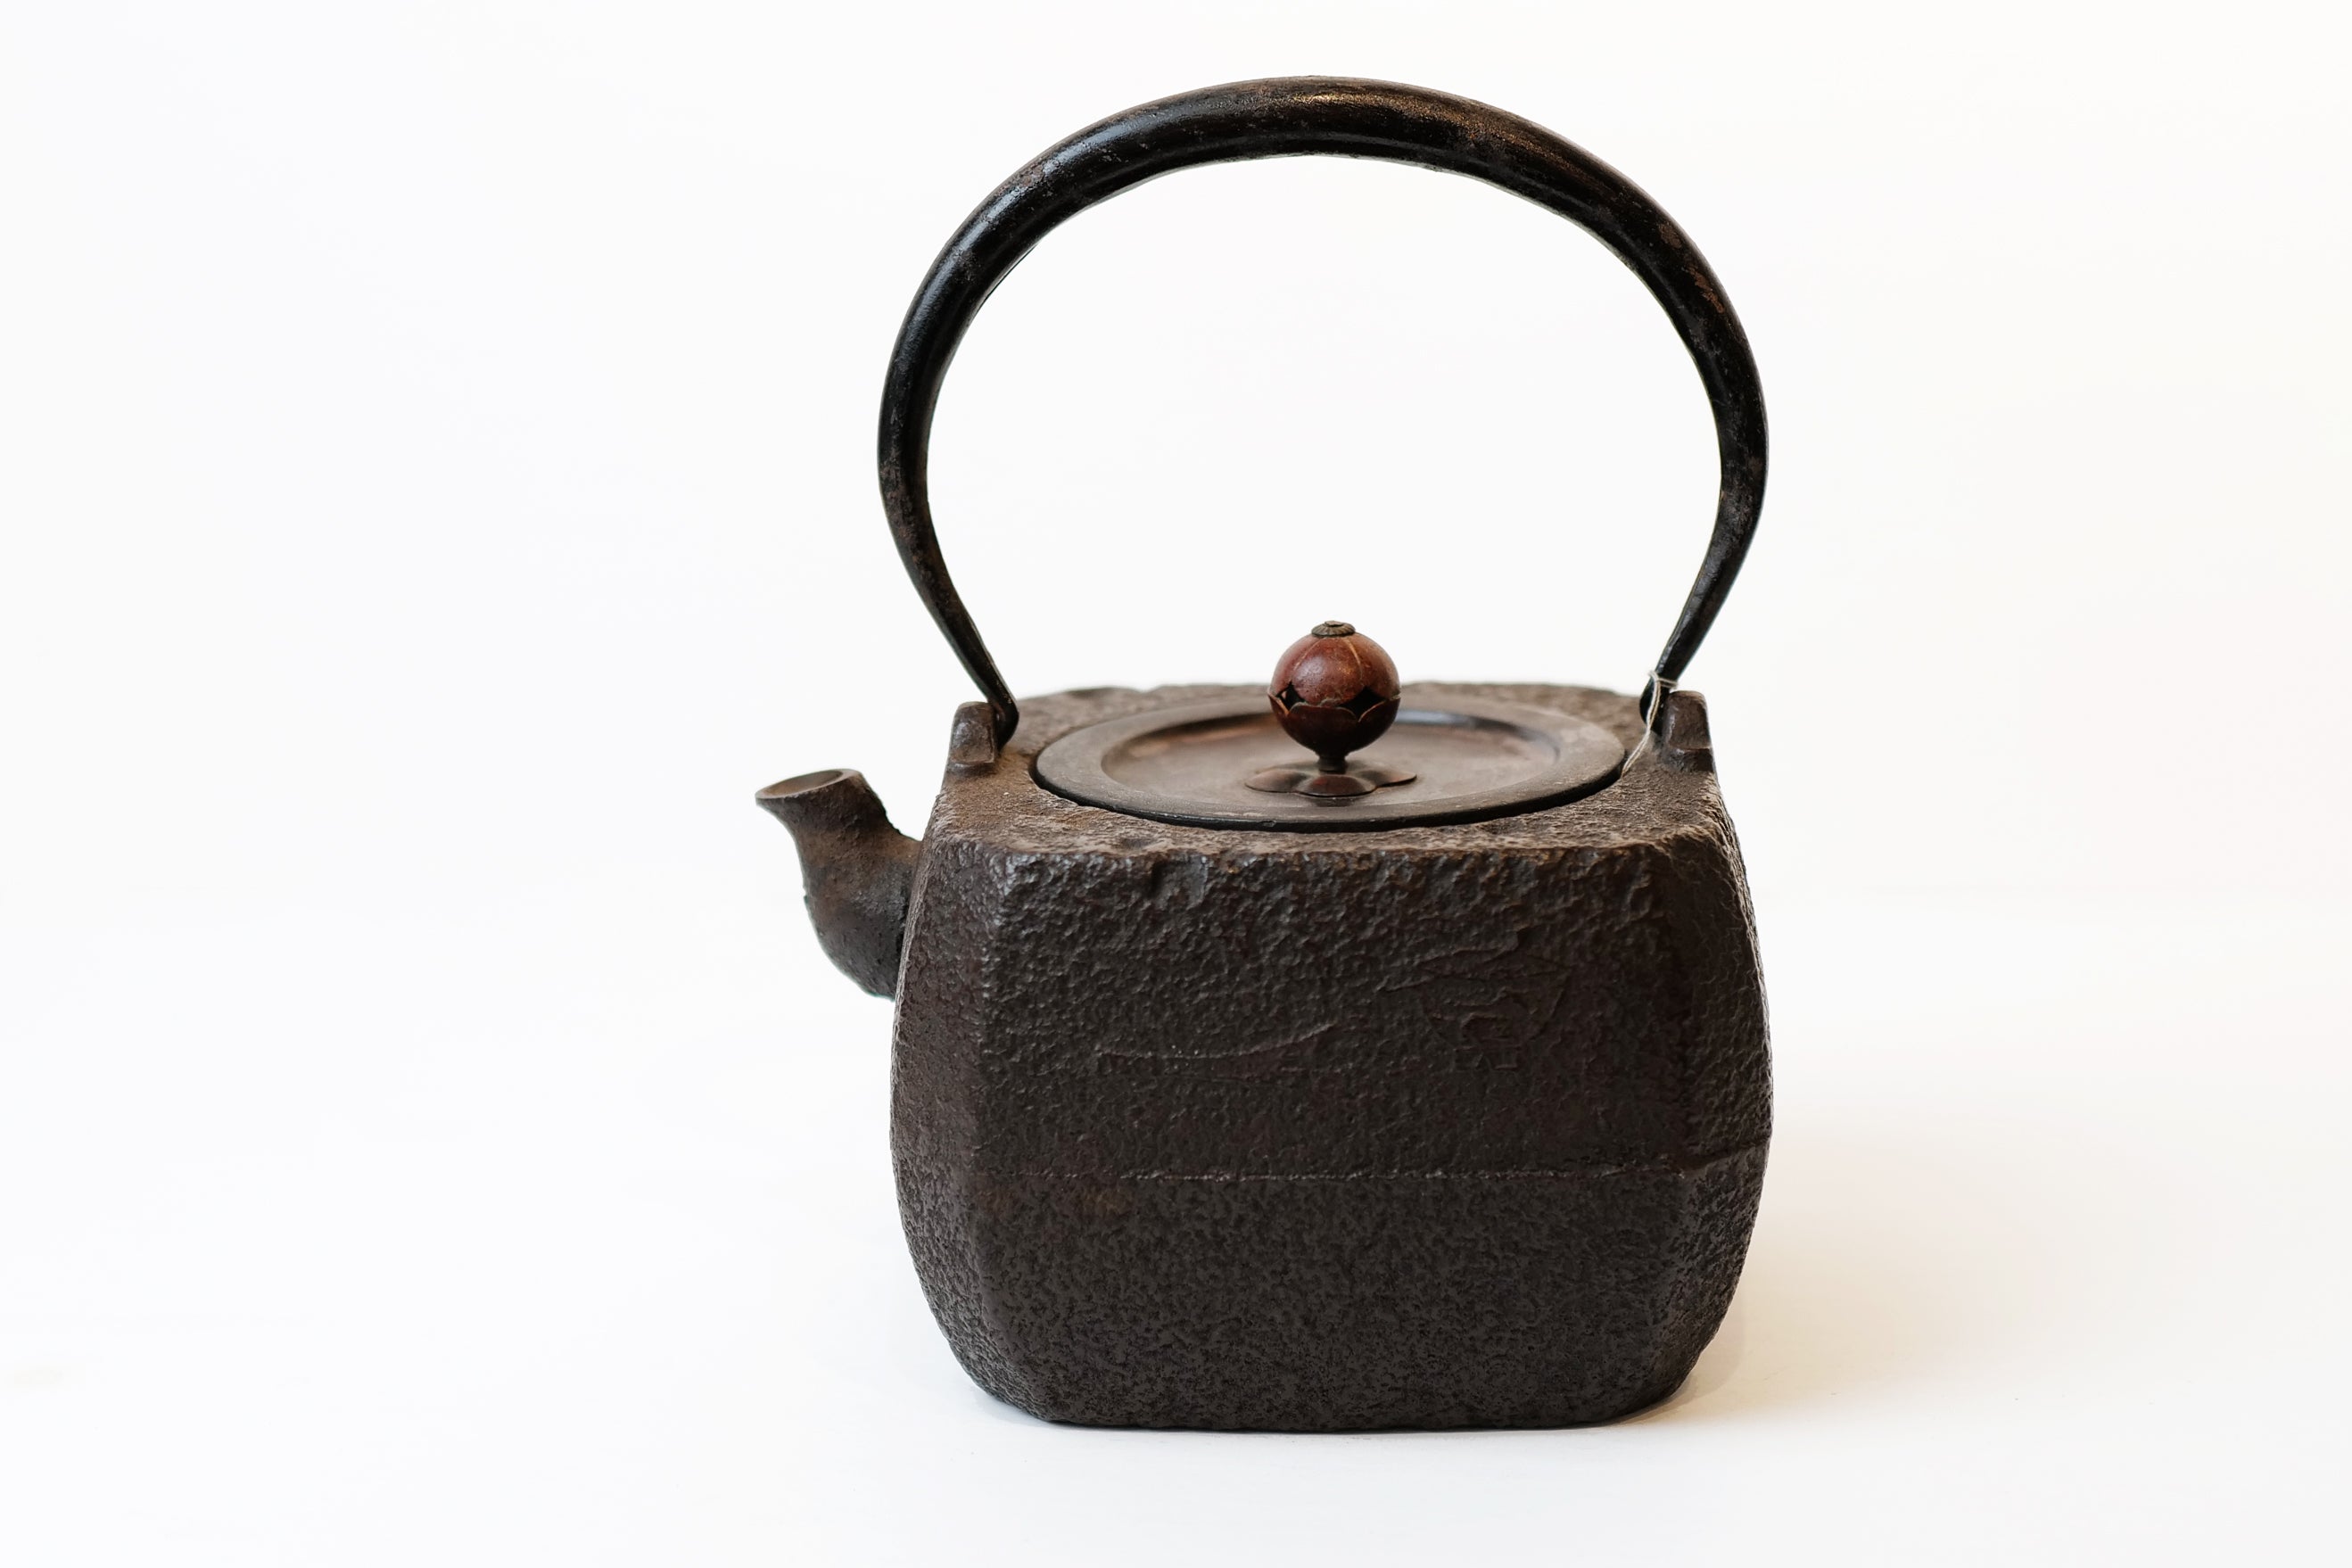 Square Iron Kettle with Poetry by Tessai【四方·诗句】